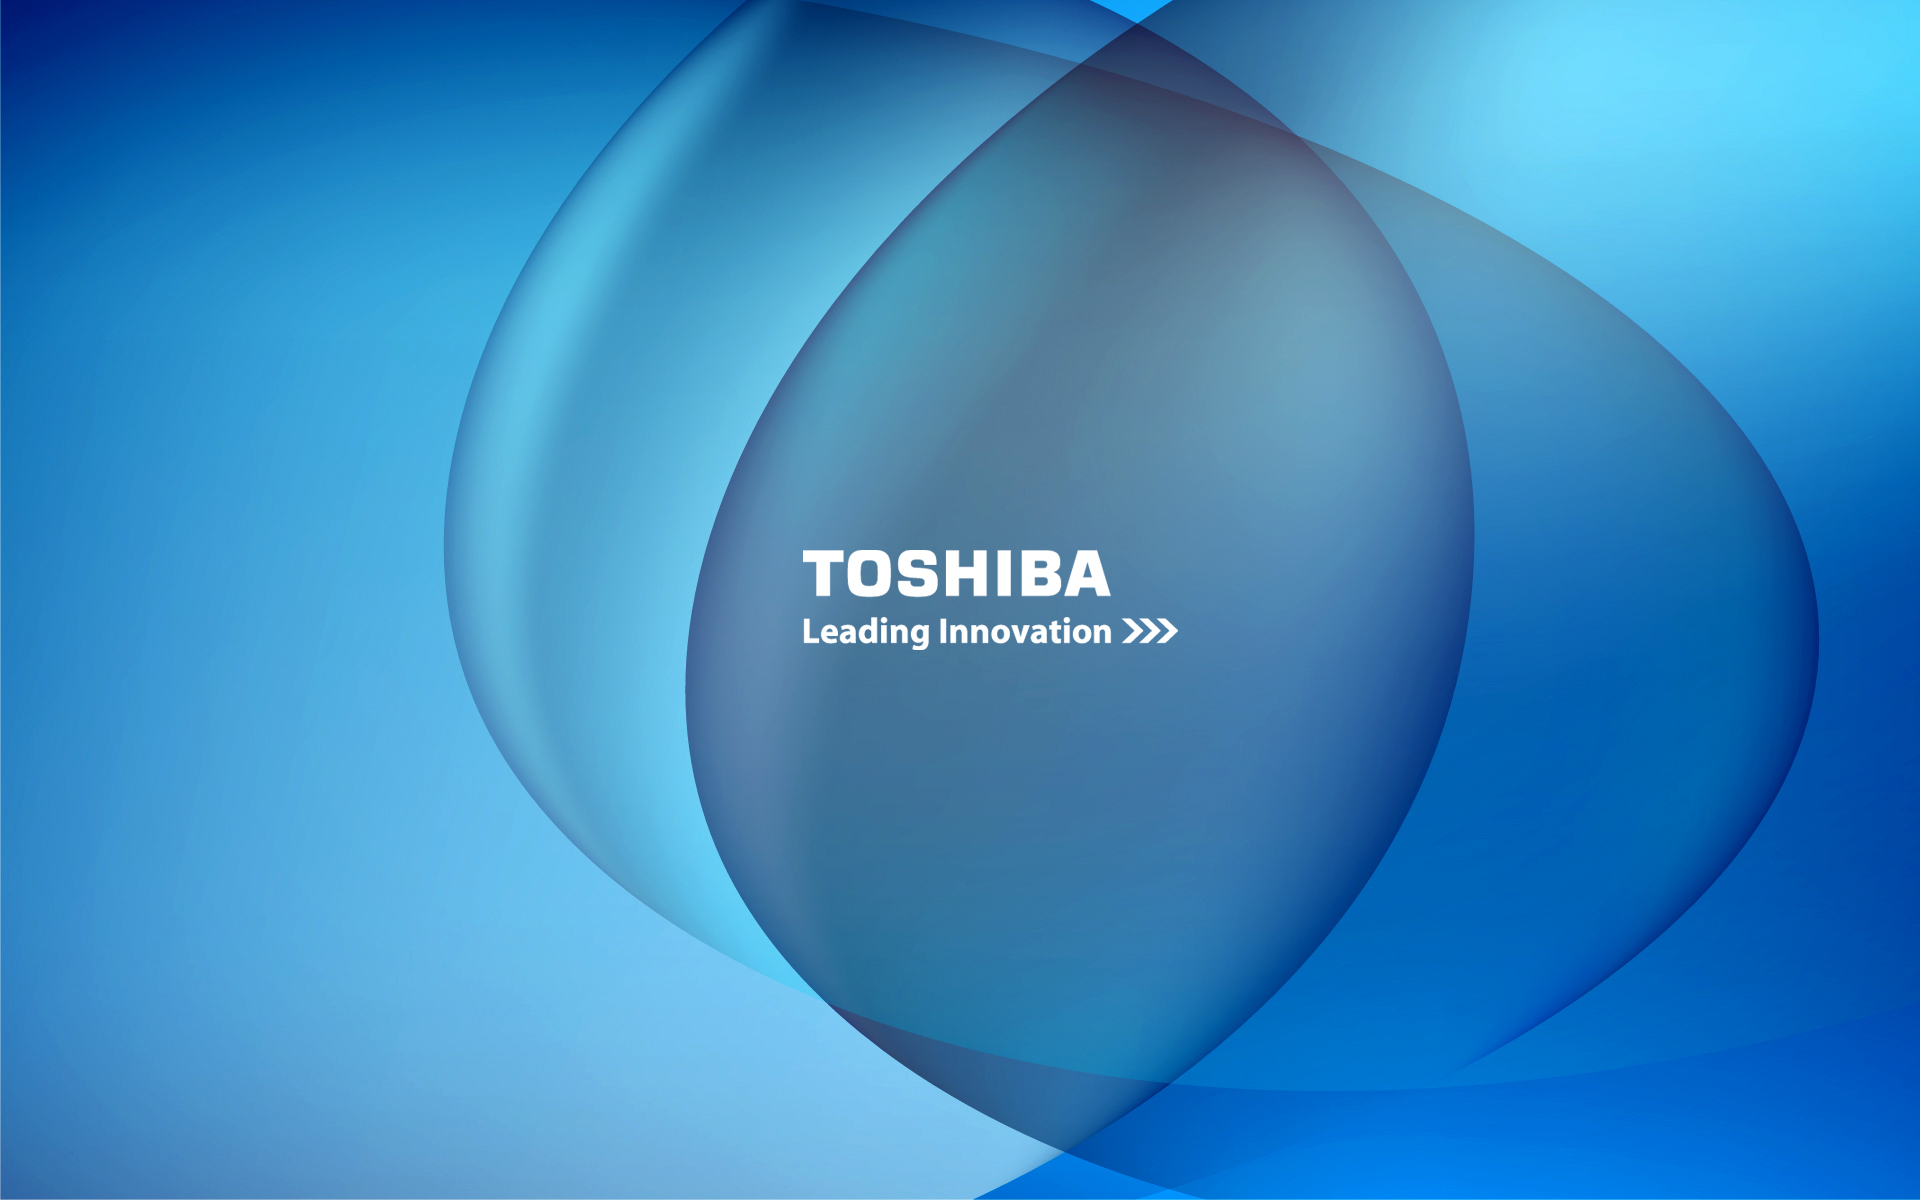 Toshiba HD Widescreen Background Ideas For The House